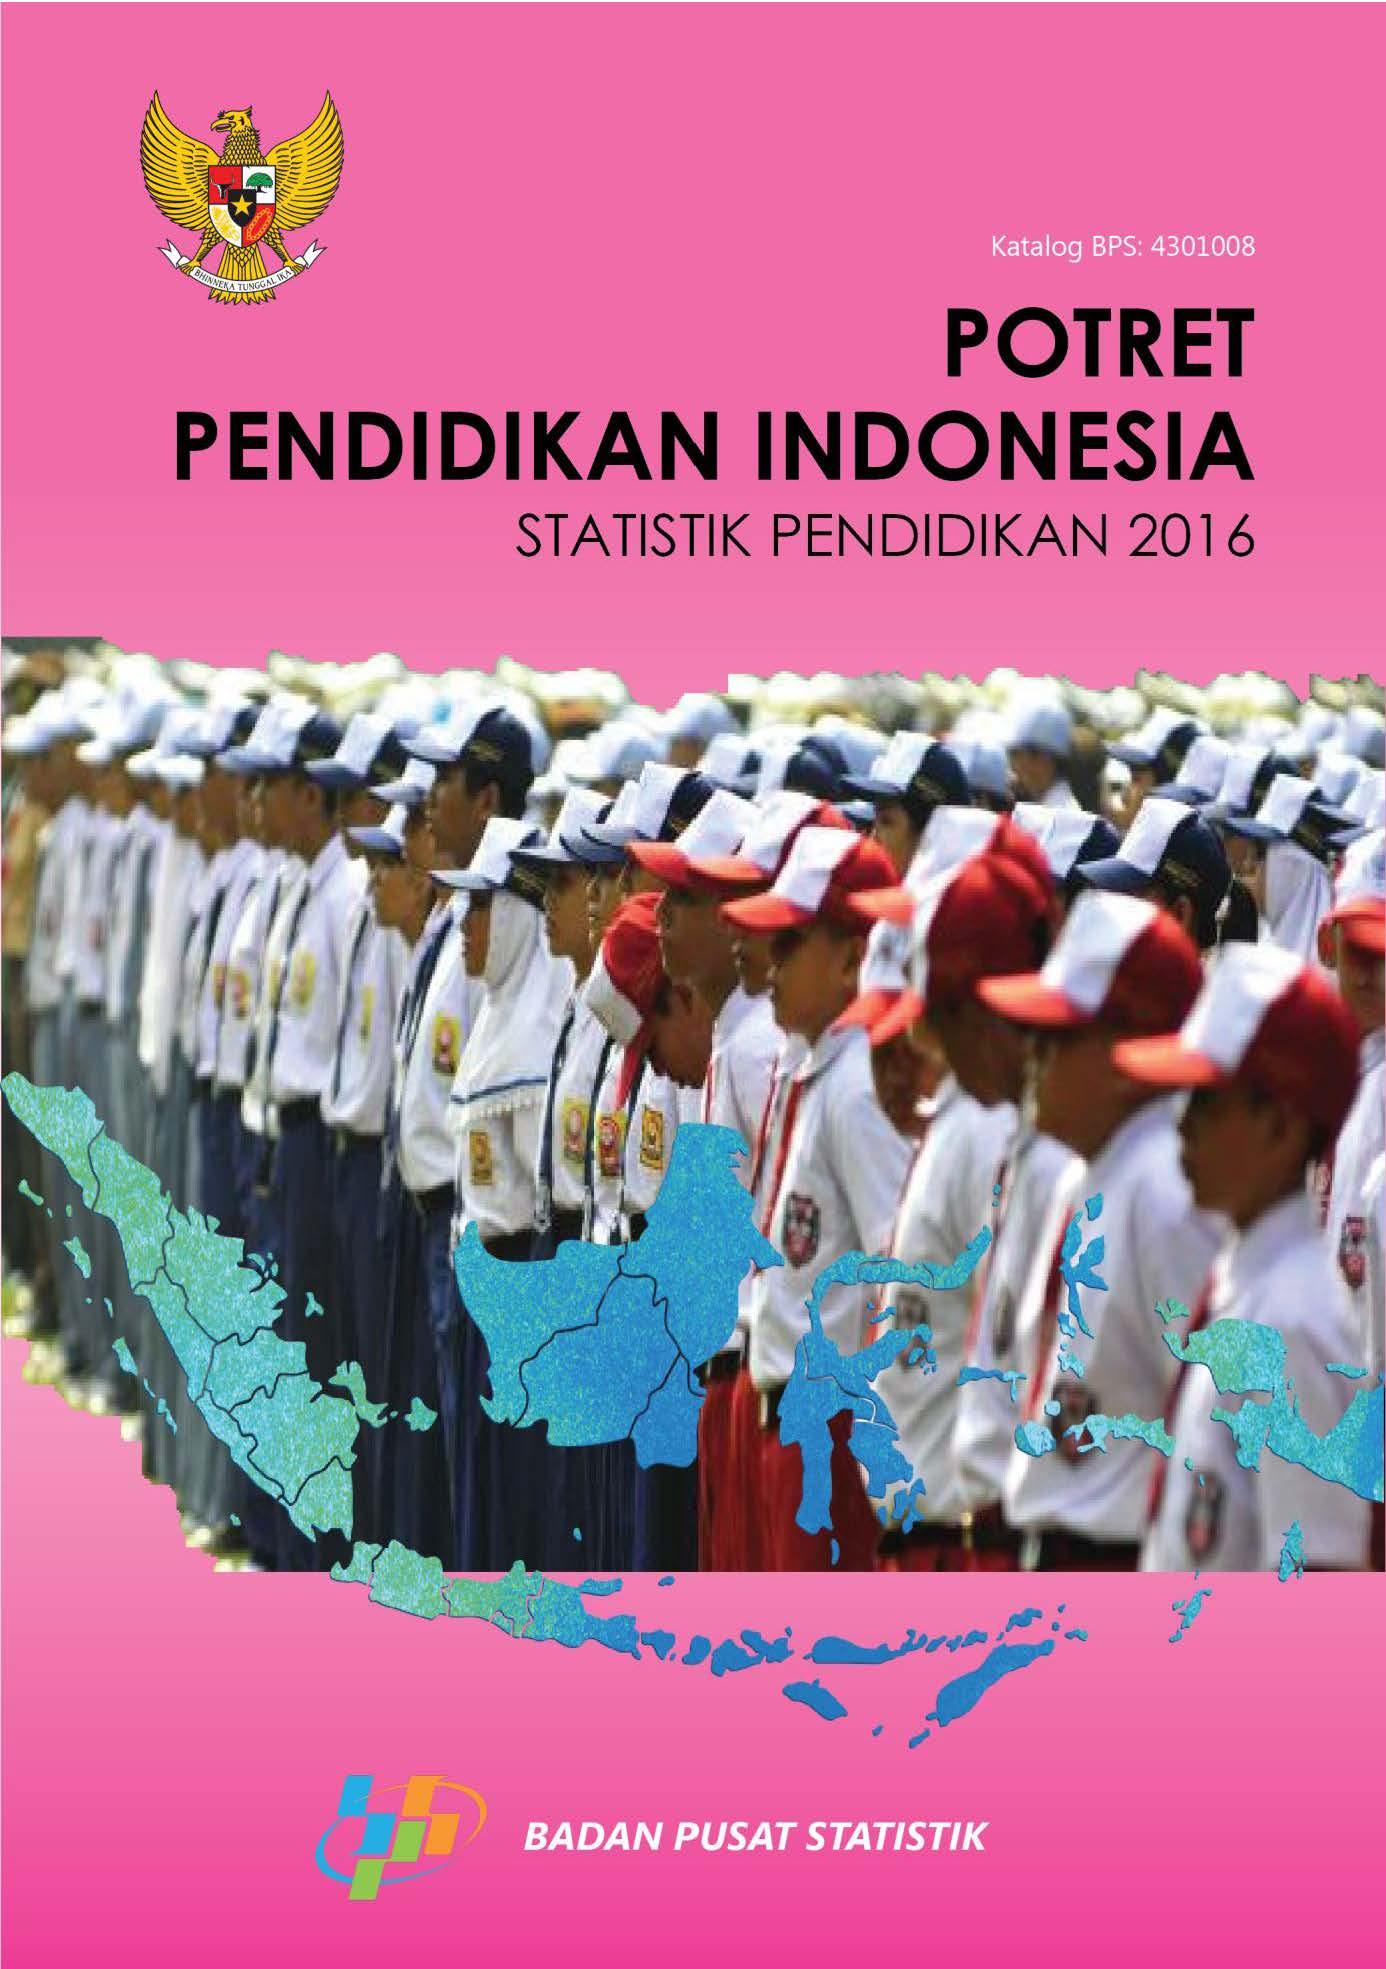 Education Depiction in Indonesia: Education Statistics in Indonesia 2016